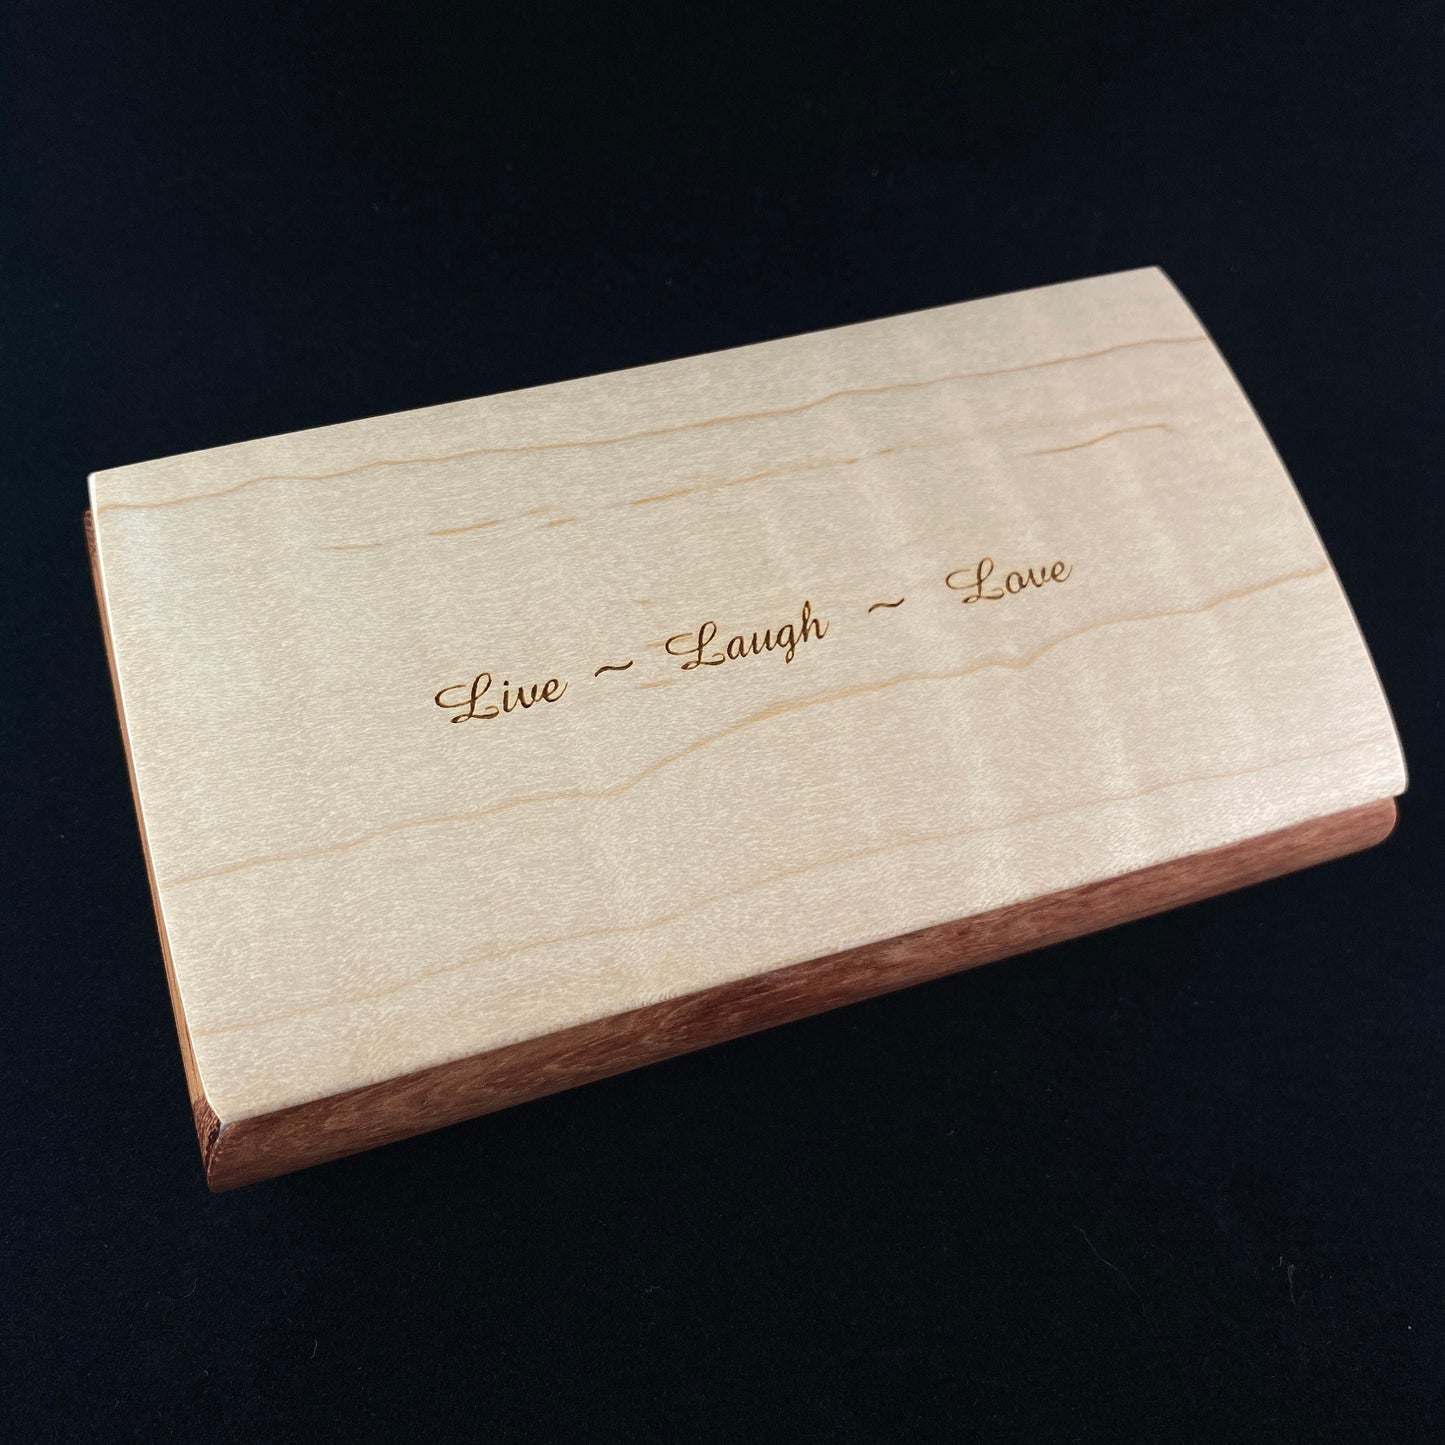 Live Laugh Love Quote Box from Mikutowski Woodworking Handmade Wooden Box with Bubinga and Curly Maple